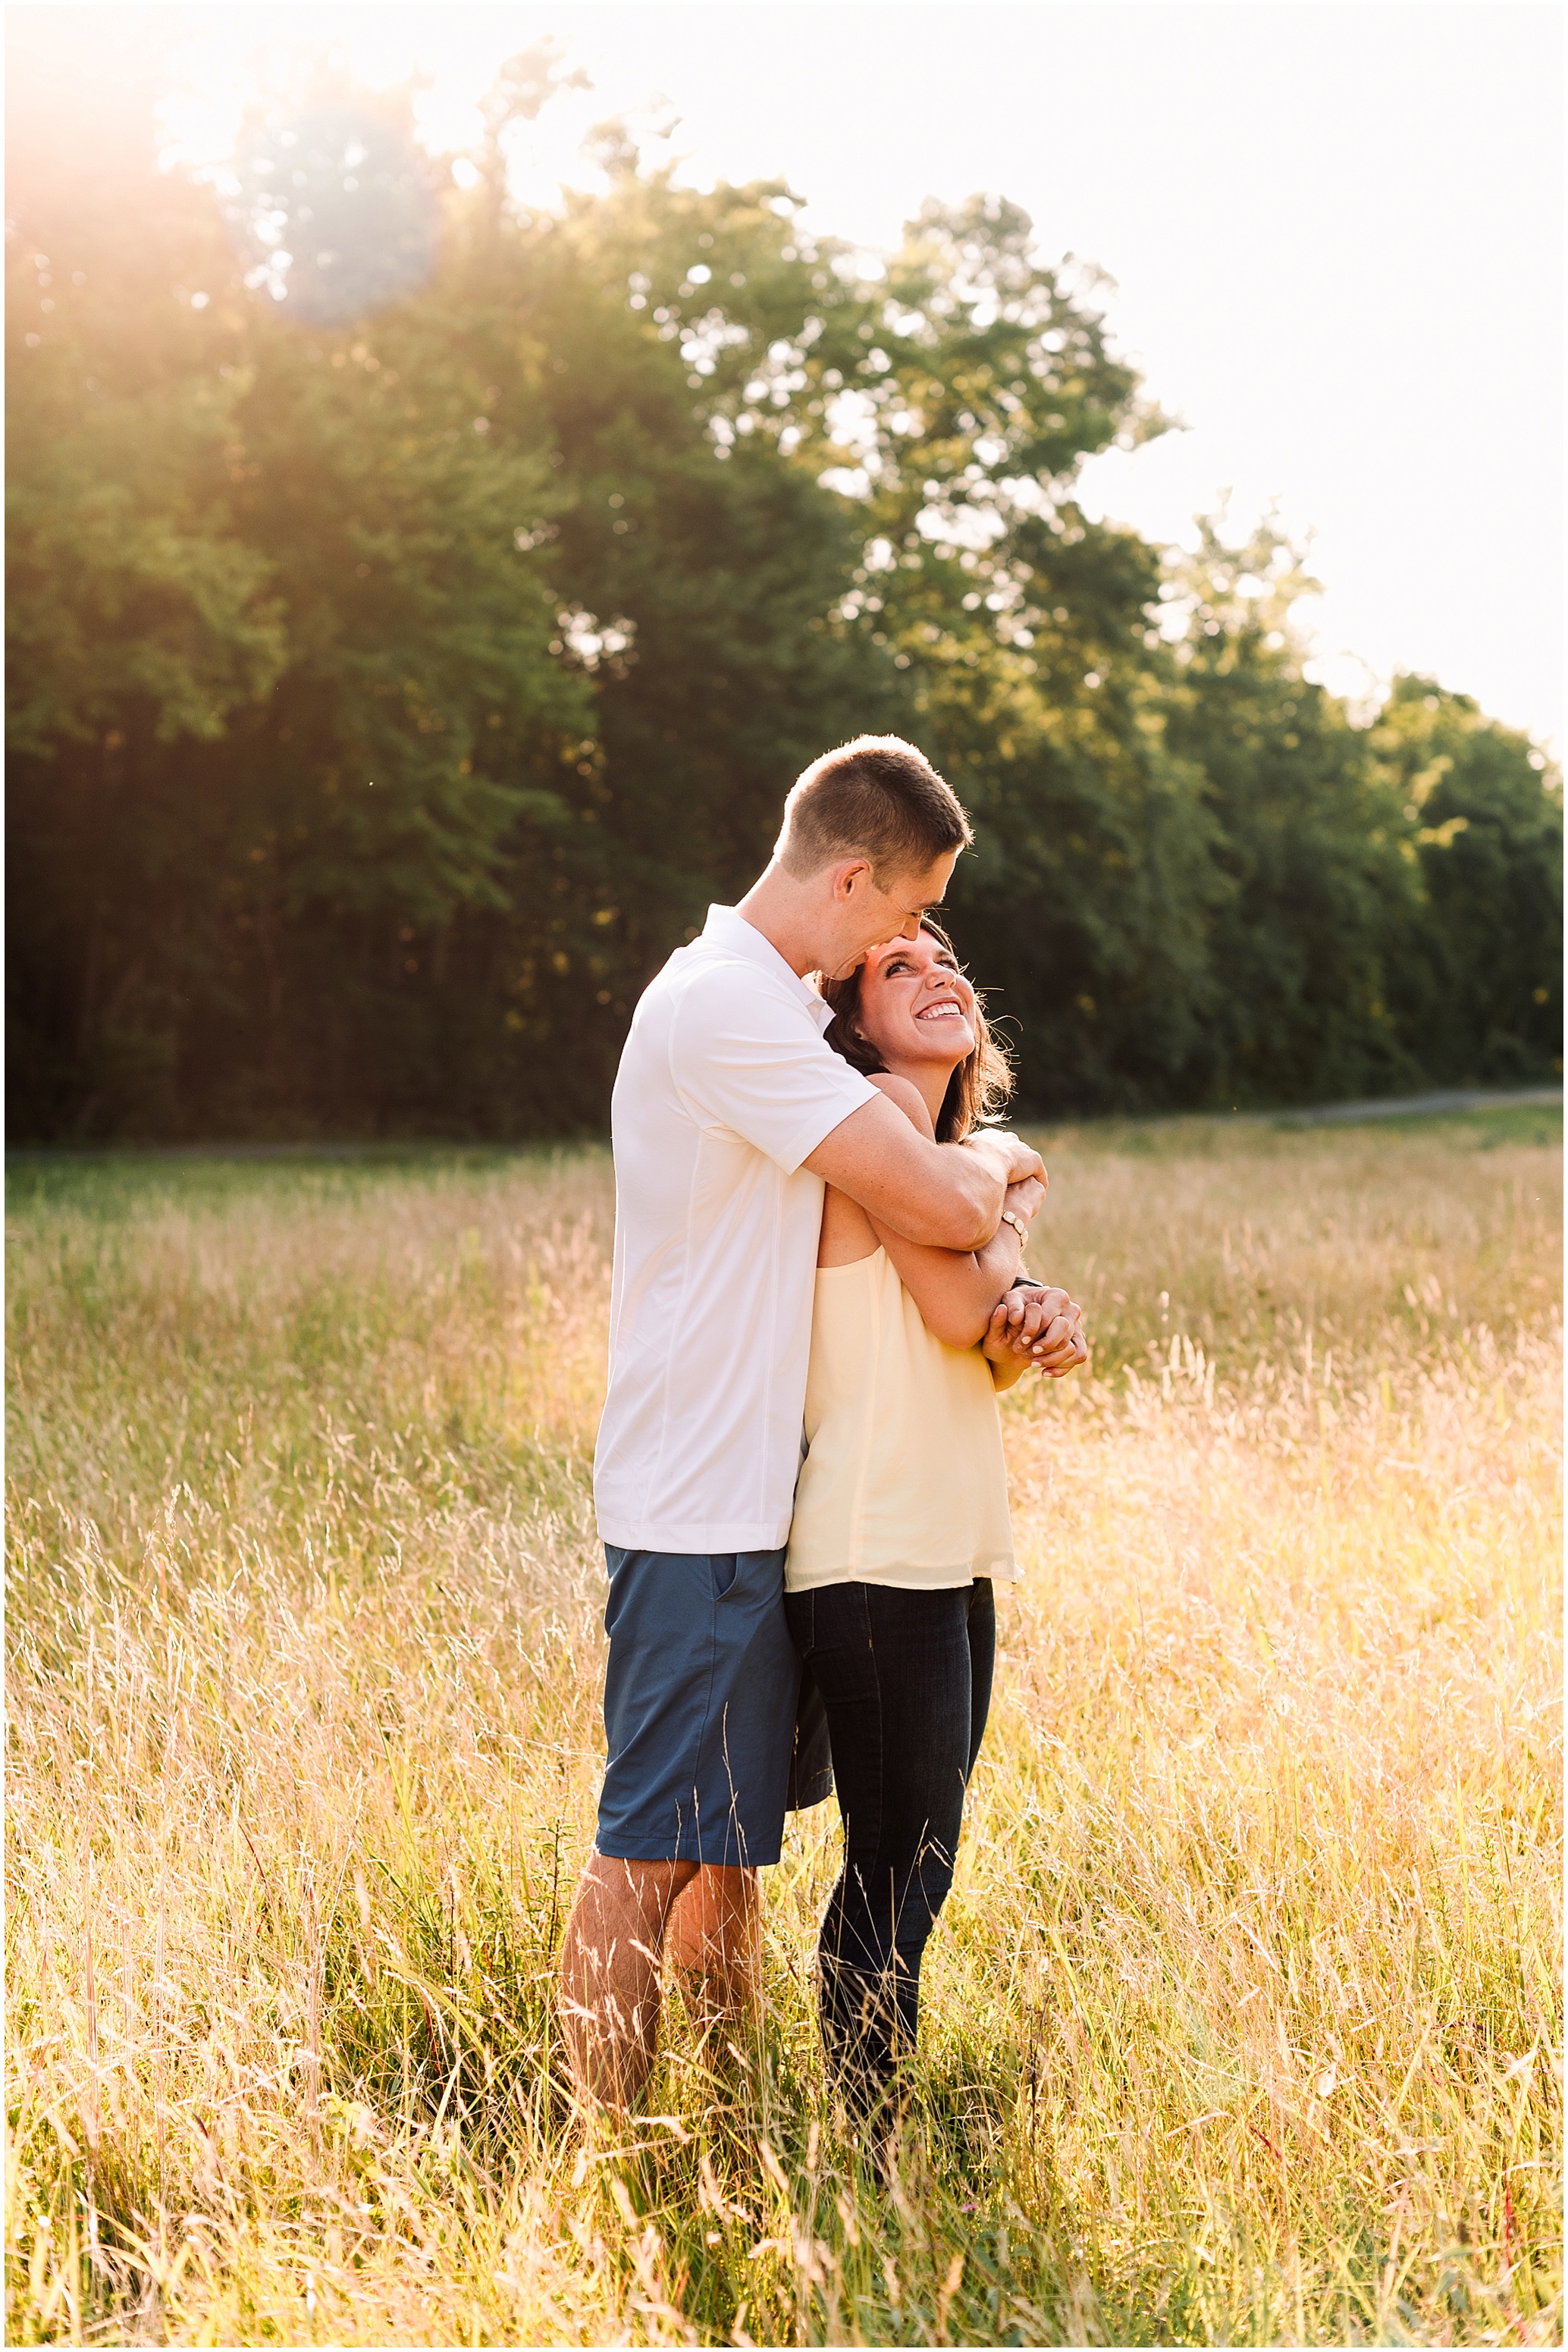 Hannah Leigh Photography Edgewater MD Engagement Session_4915.jpg